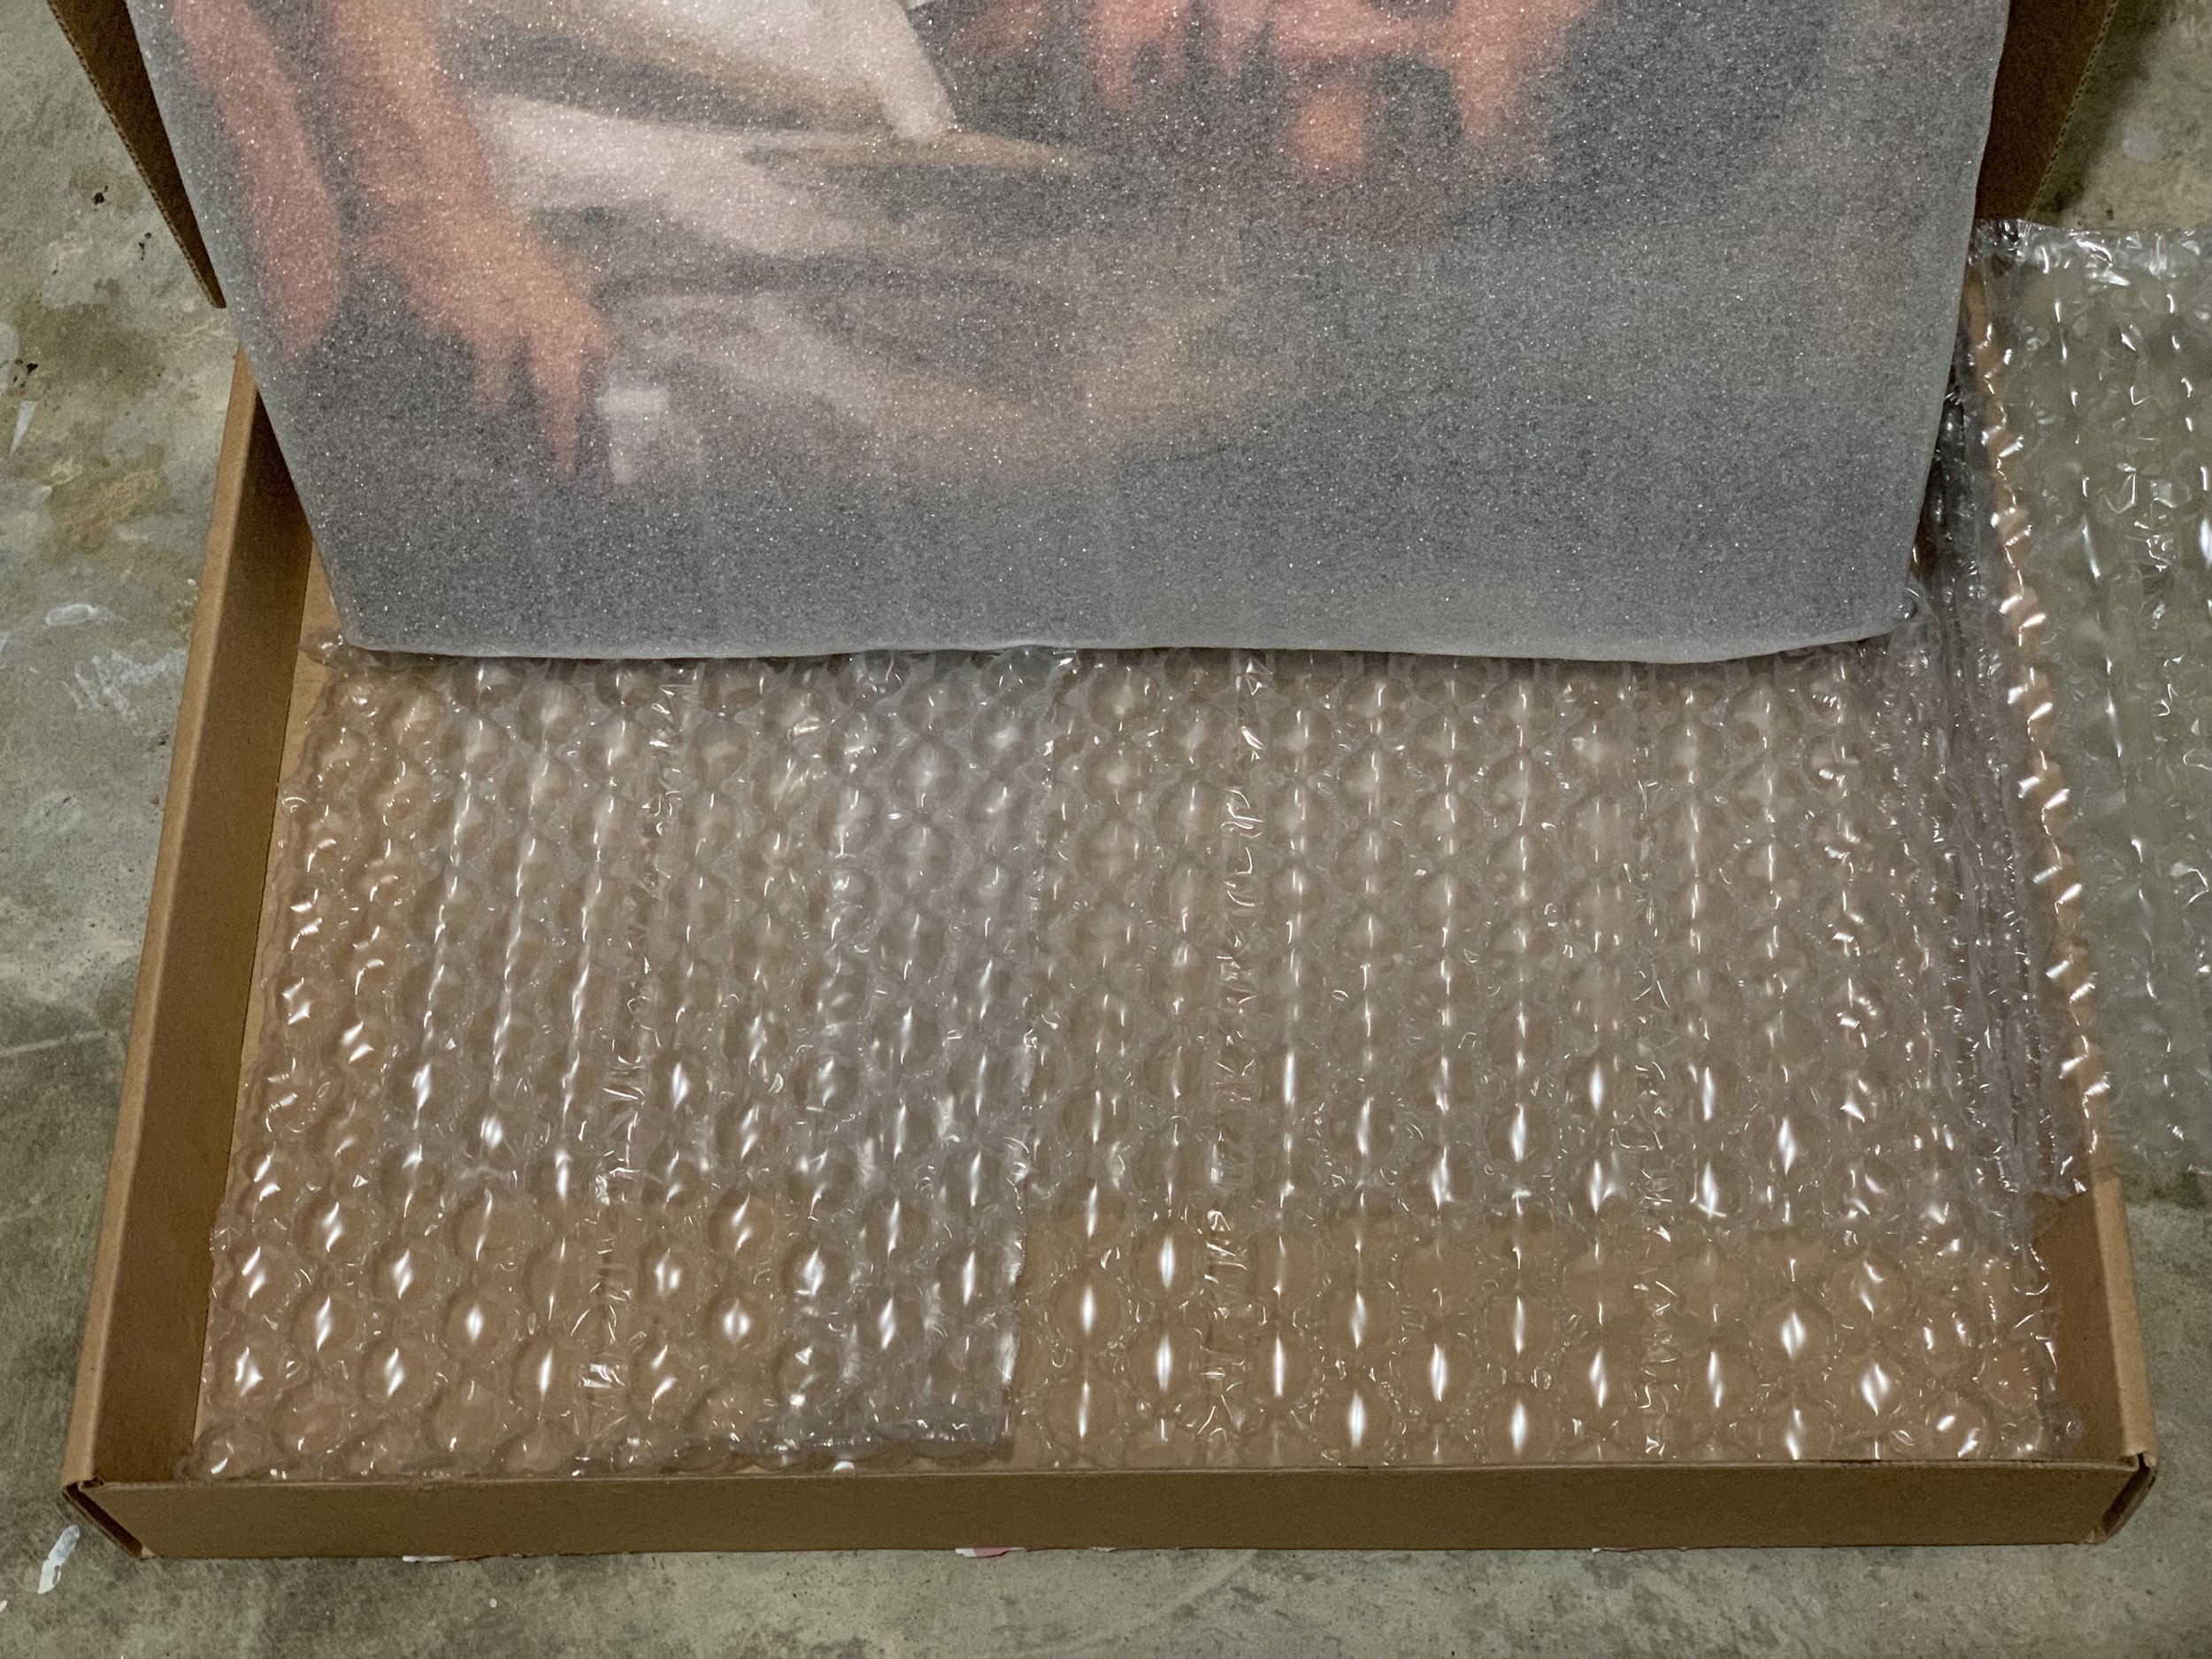 Front of print is protected in packaging with two bubble wrap inserts